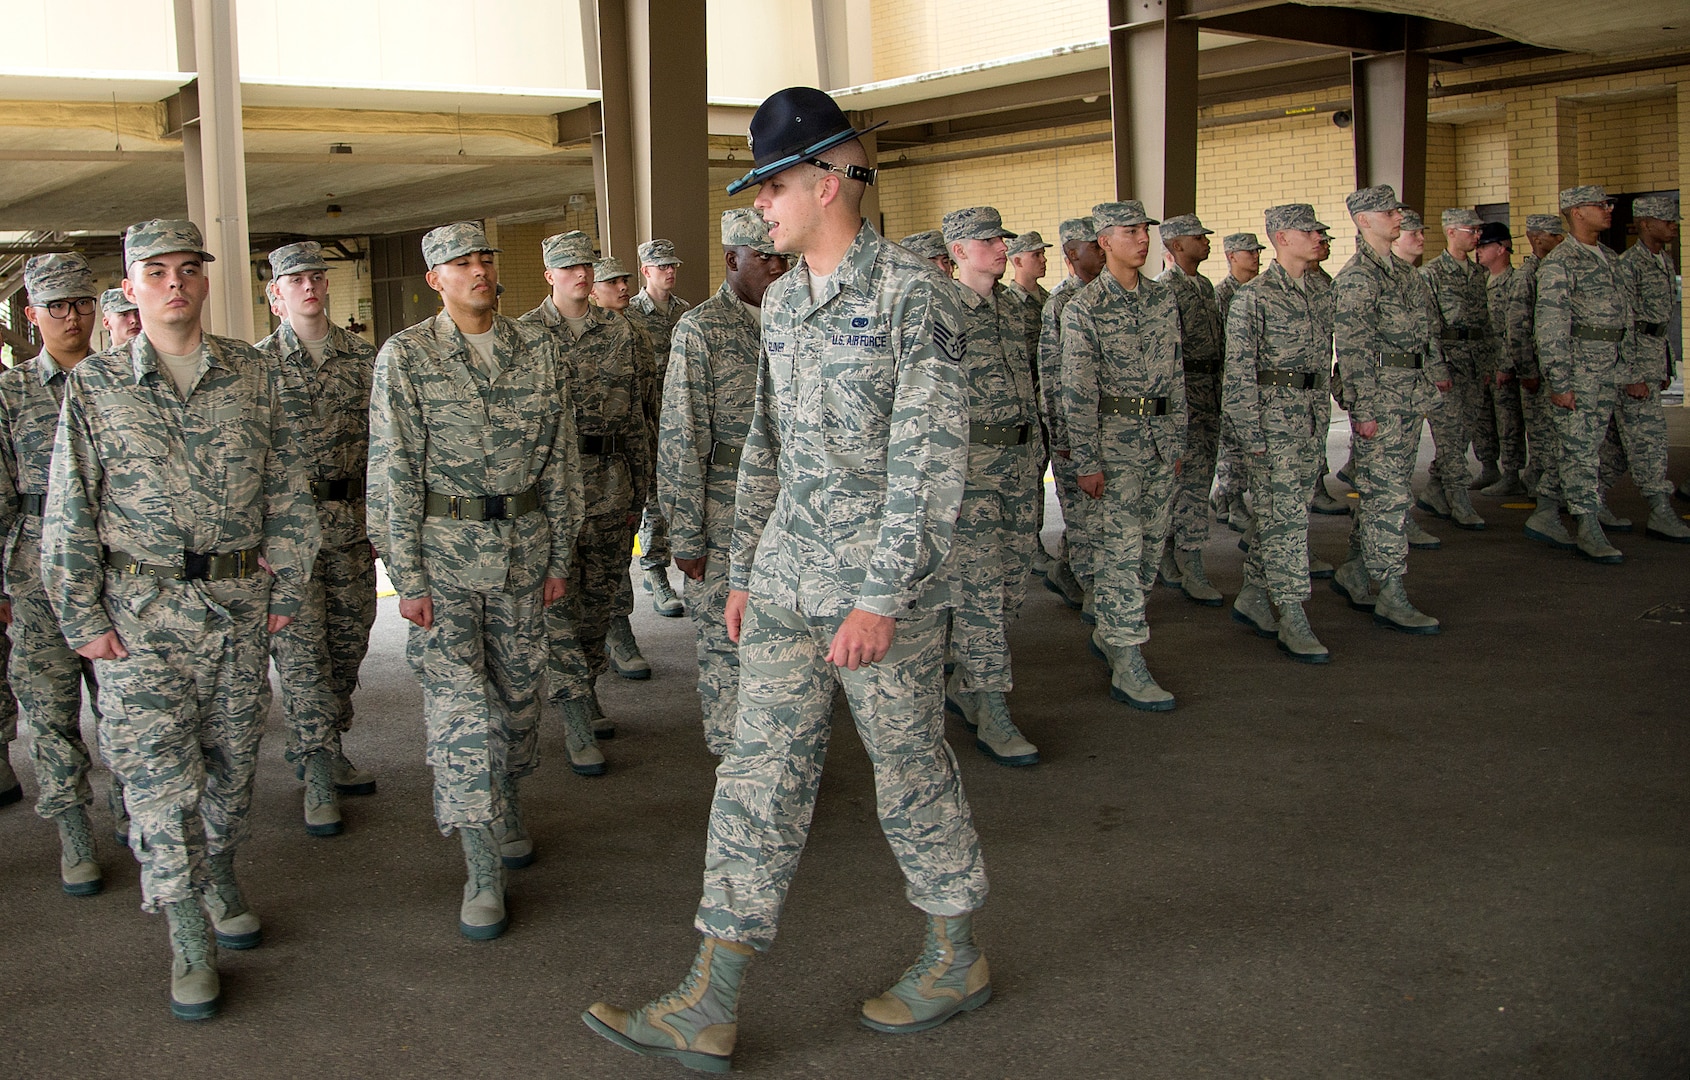 Staff Sgt. Eddie Glover, inspects a flight of trainees at the 322nd Training Squadron April 17, at Joint Base San Antonio-Lackland. Staff Sgt. Glover was named the 2014 Military Training Instructor of the Year.  (U.S. Air Force photo by Benjamin Faske) (released)